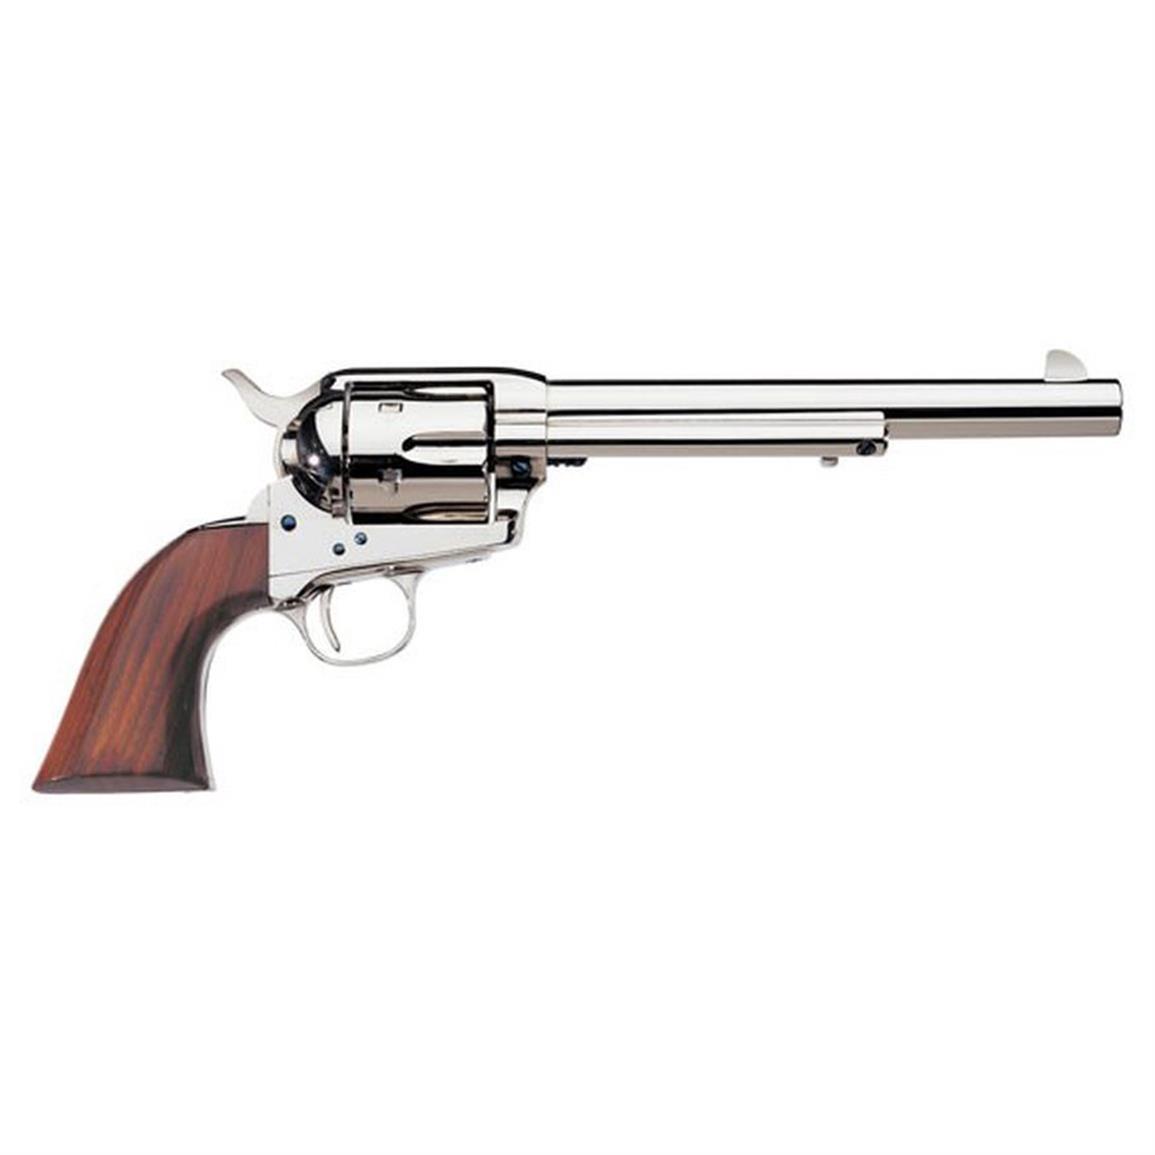 Taylor's & Co. Uberti 1873 Cattleman Nickel Plated, Revolver, .45 Colt, 7.5" Barrel, 6 Rounds